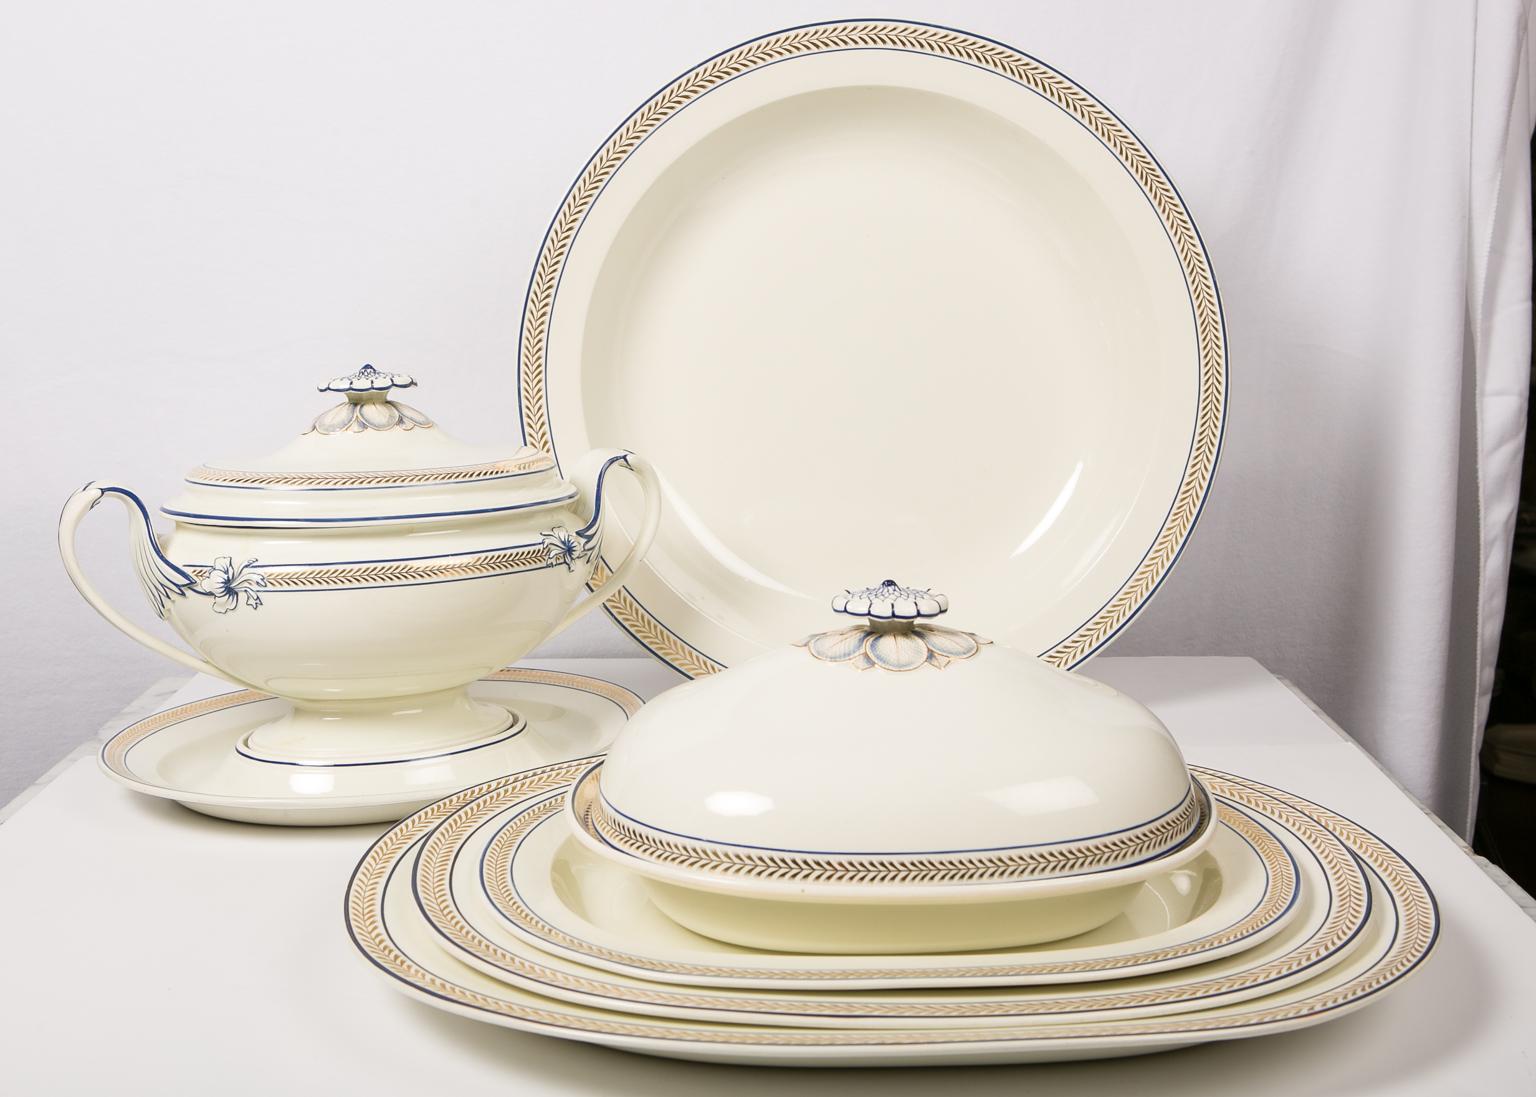 Wedgwood Antique Creamware Dinner Service with 57 Pieces England ca. 1820 3